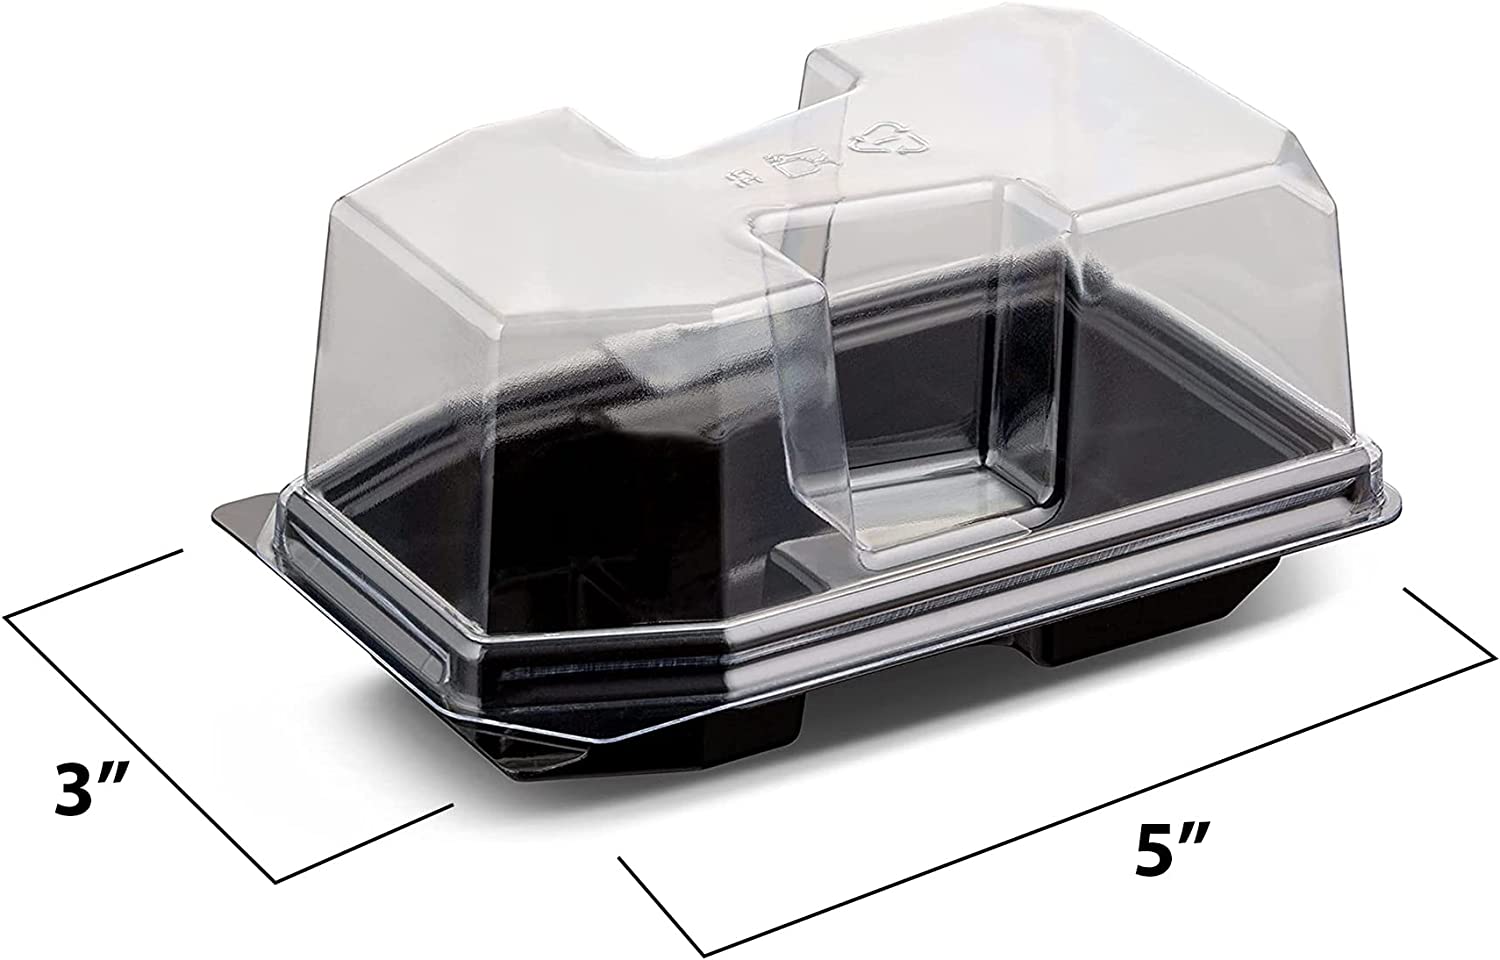 MT Products Medium Shallow Hinged Plastic Cake Slice Container